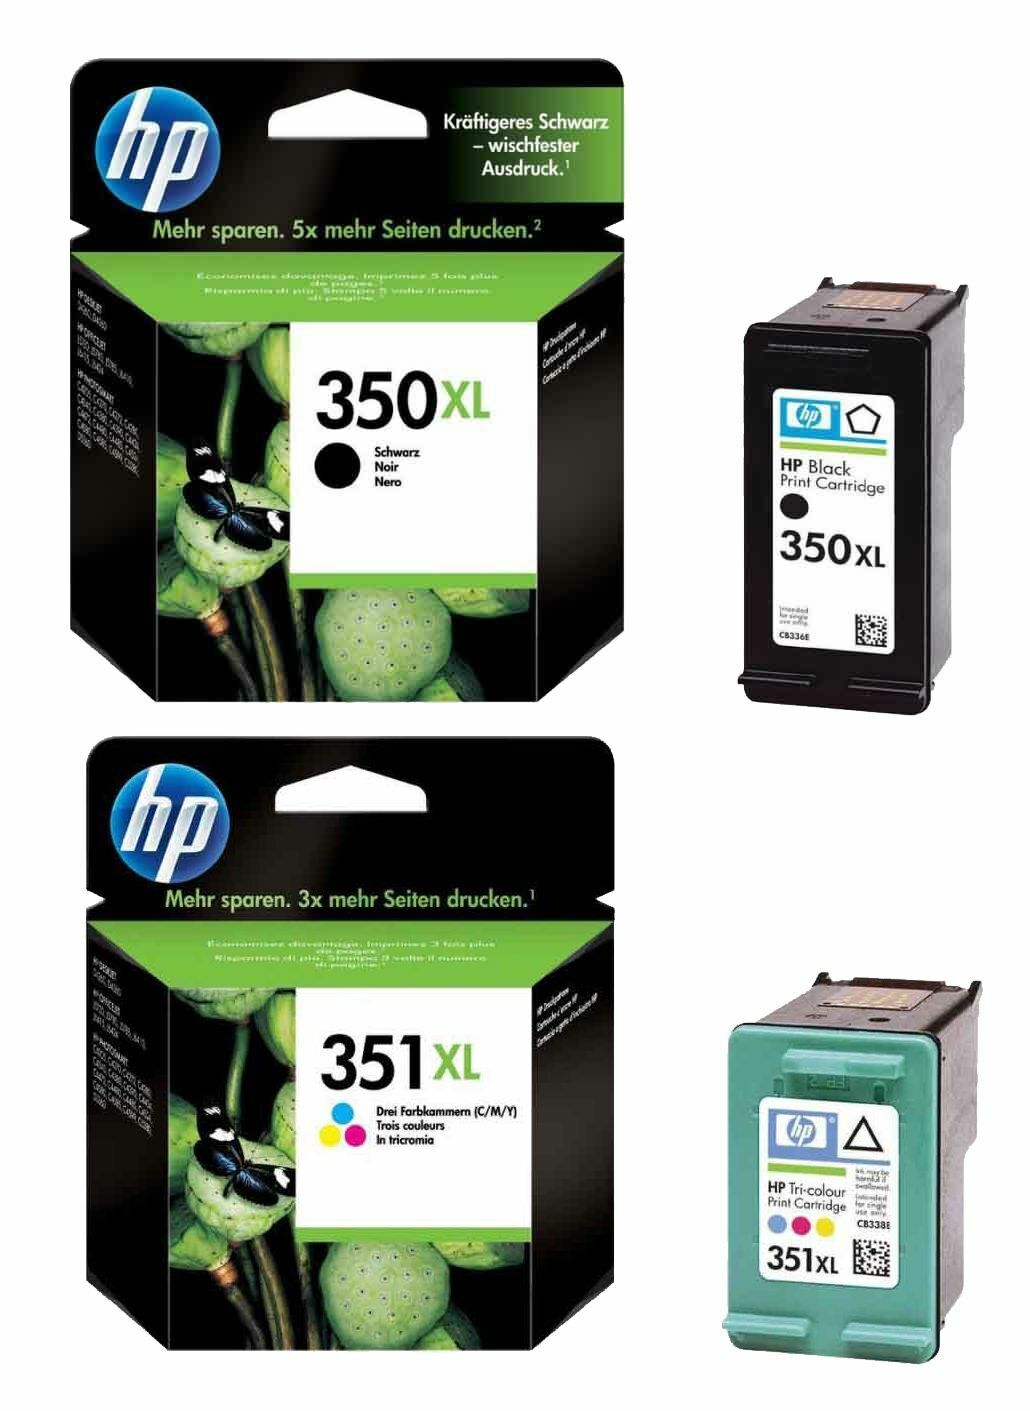 UNBOXED HP 350XL + HP 351XL Ink Cartridges - CB336E & CB338E - FREE UK DELIVERY!